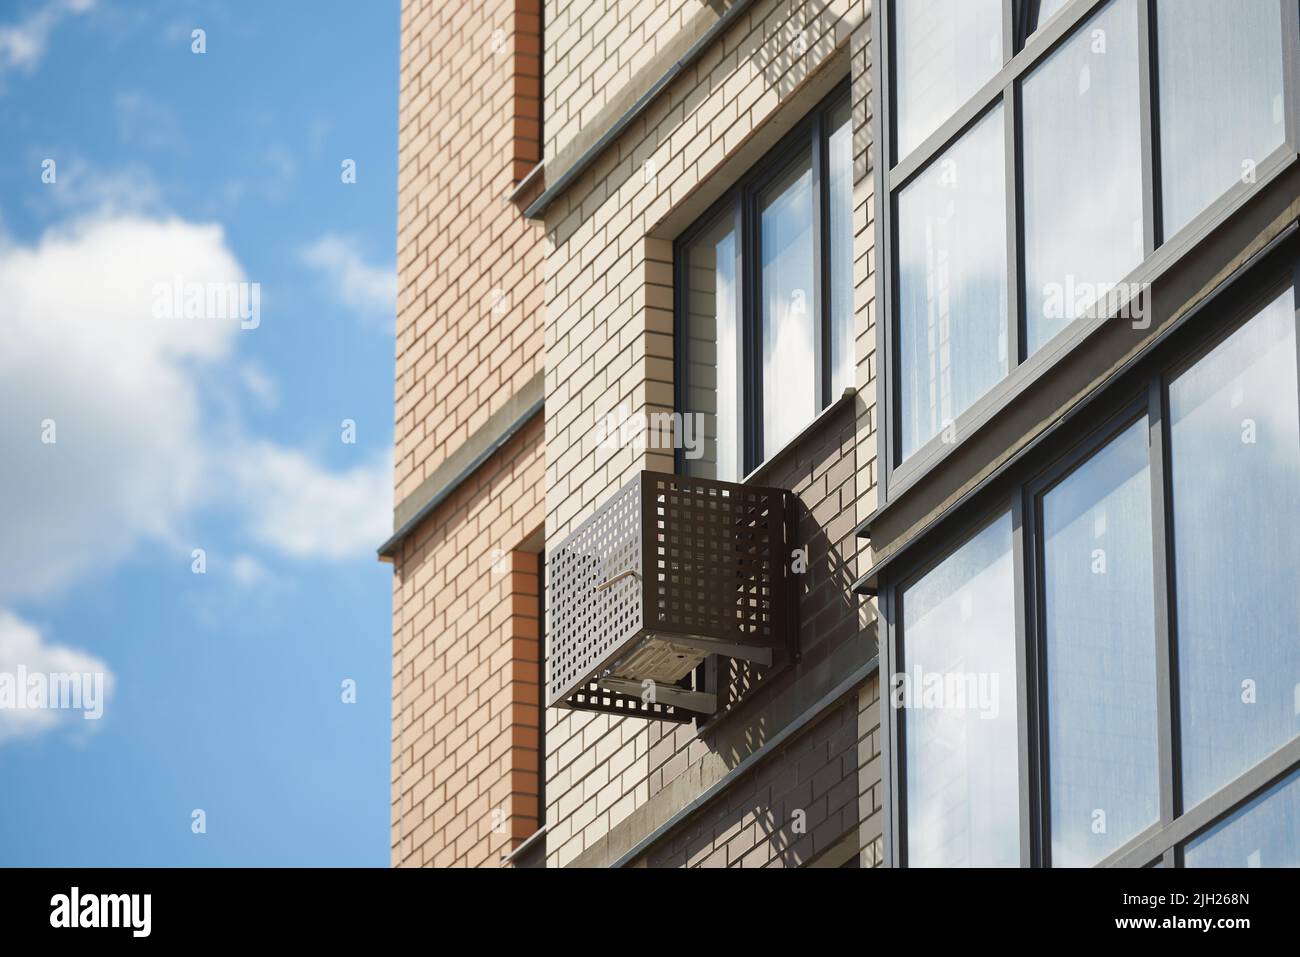 Facade of apartment building with decorative air conditioner covers. Stock Photo